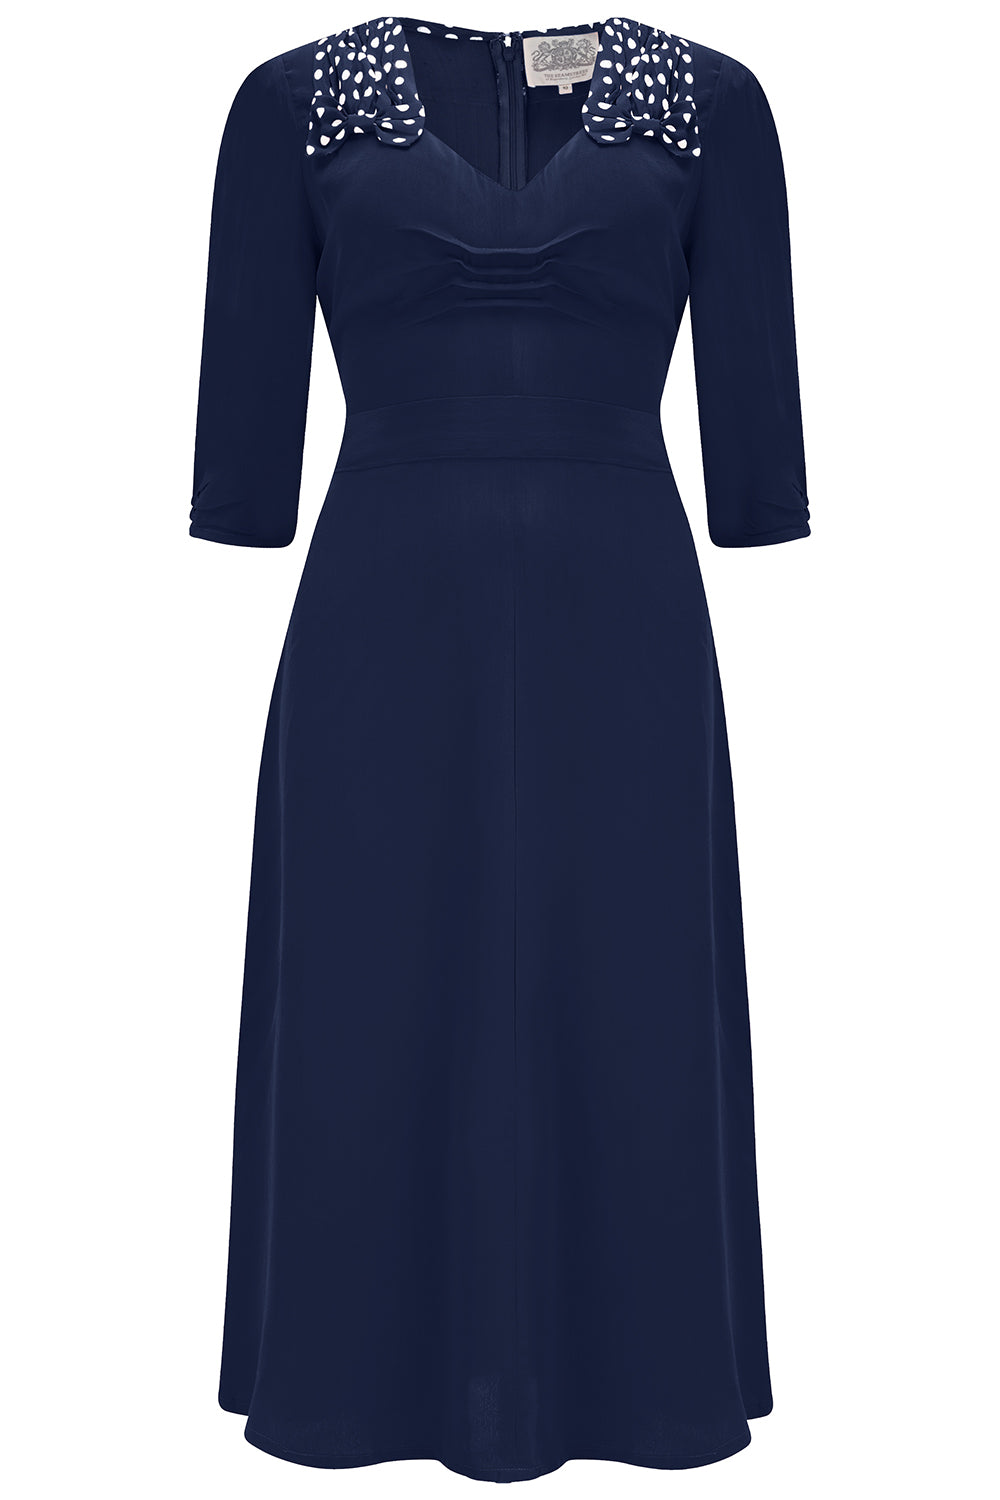 1940s Dresses | 40s Dress, Swing Dress, Tea Dresses Veronica French Navy A Classic 1940s Inspired Vintage Style By The Seamstress Of Bloomsbury £89.95 AT vintagedancer.com